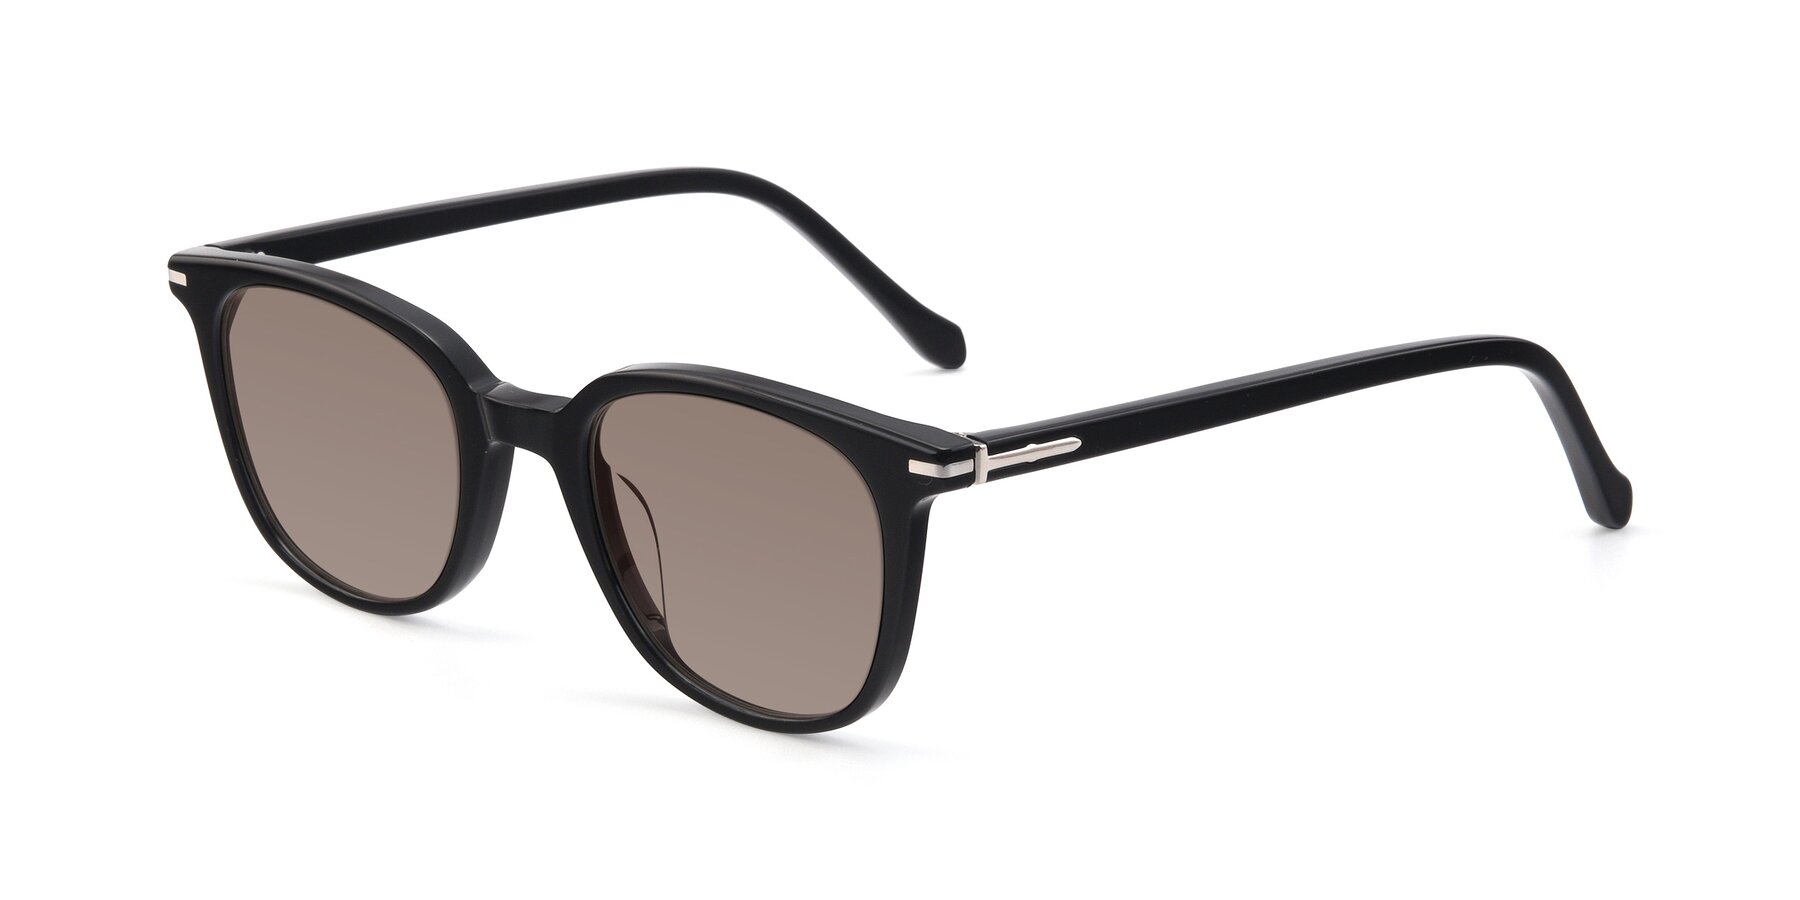 Angle of 17562 in Black with Medium Brown Tinted Lenses